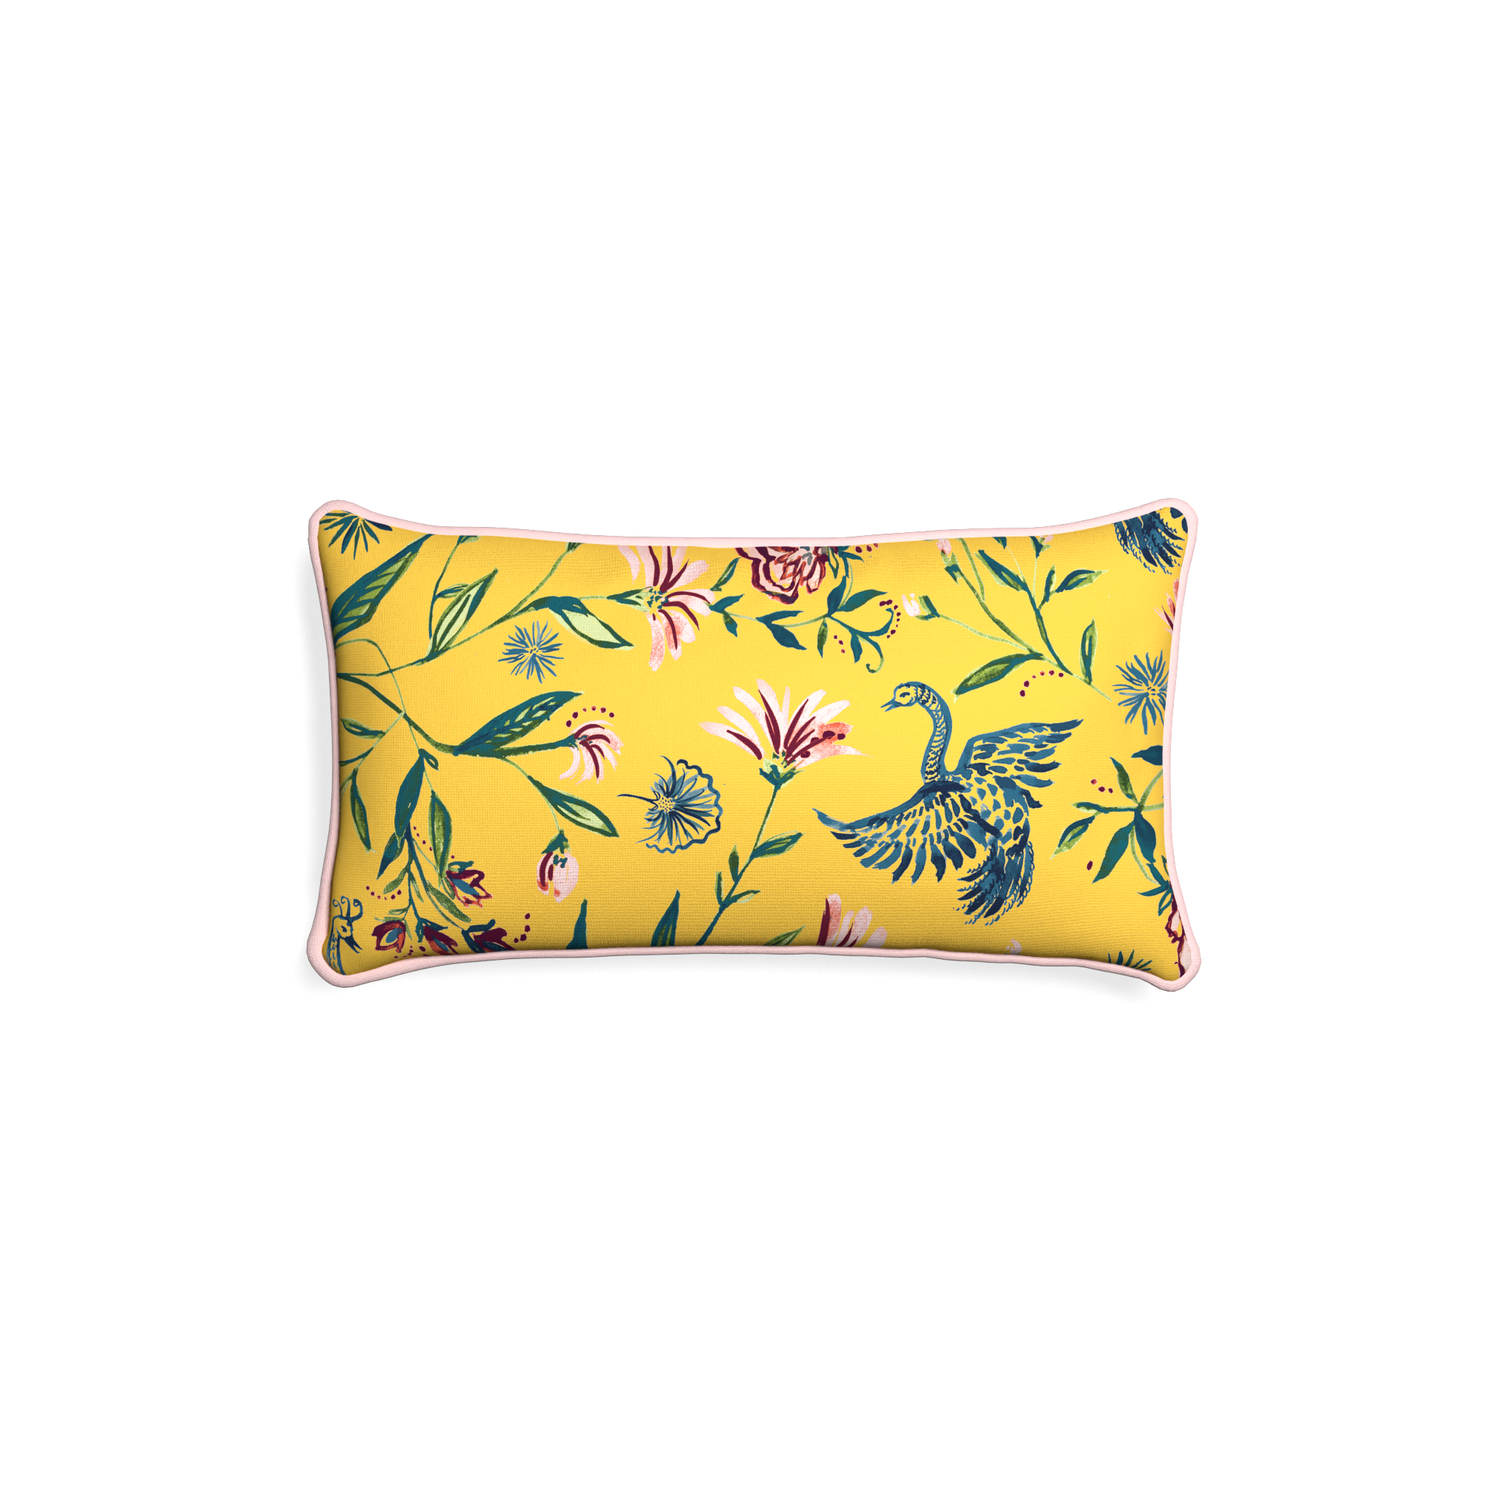 Petite-lumbar daphne canary custom yellow chinoiseriepillow with petal piping on white background